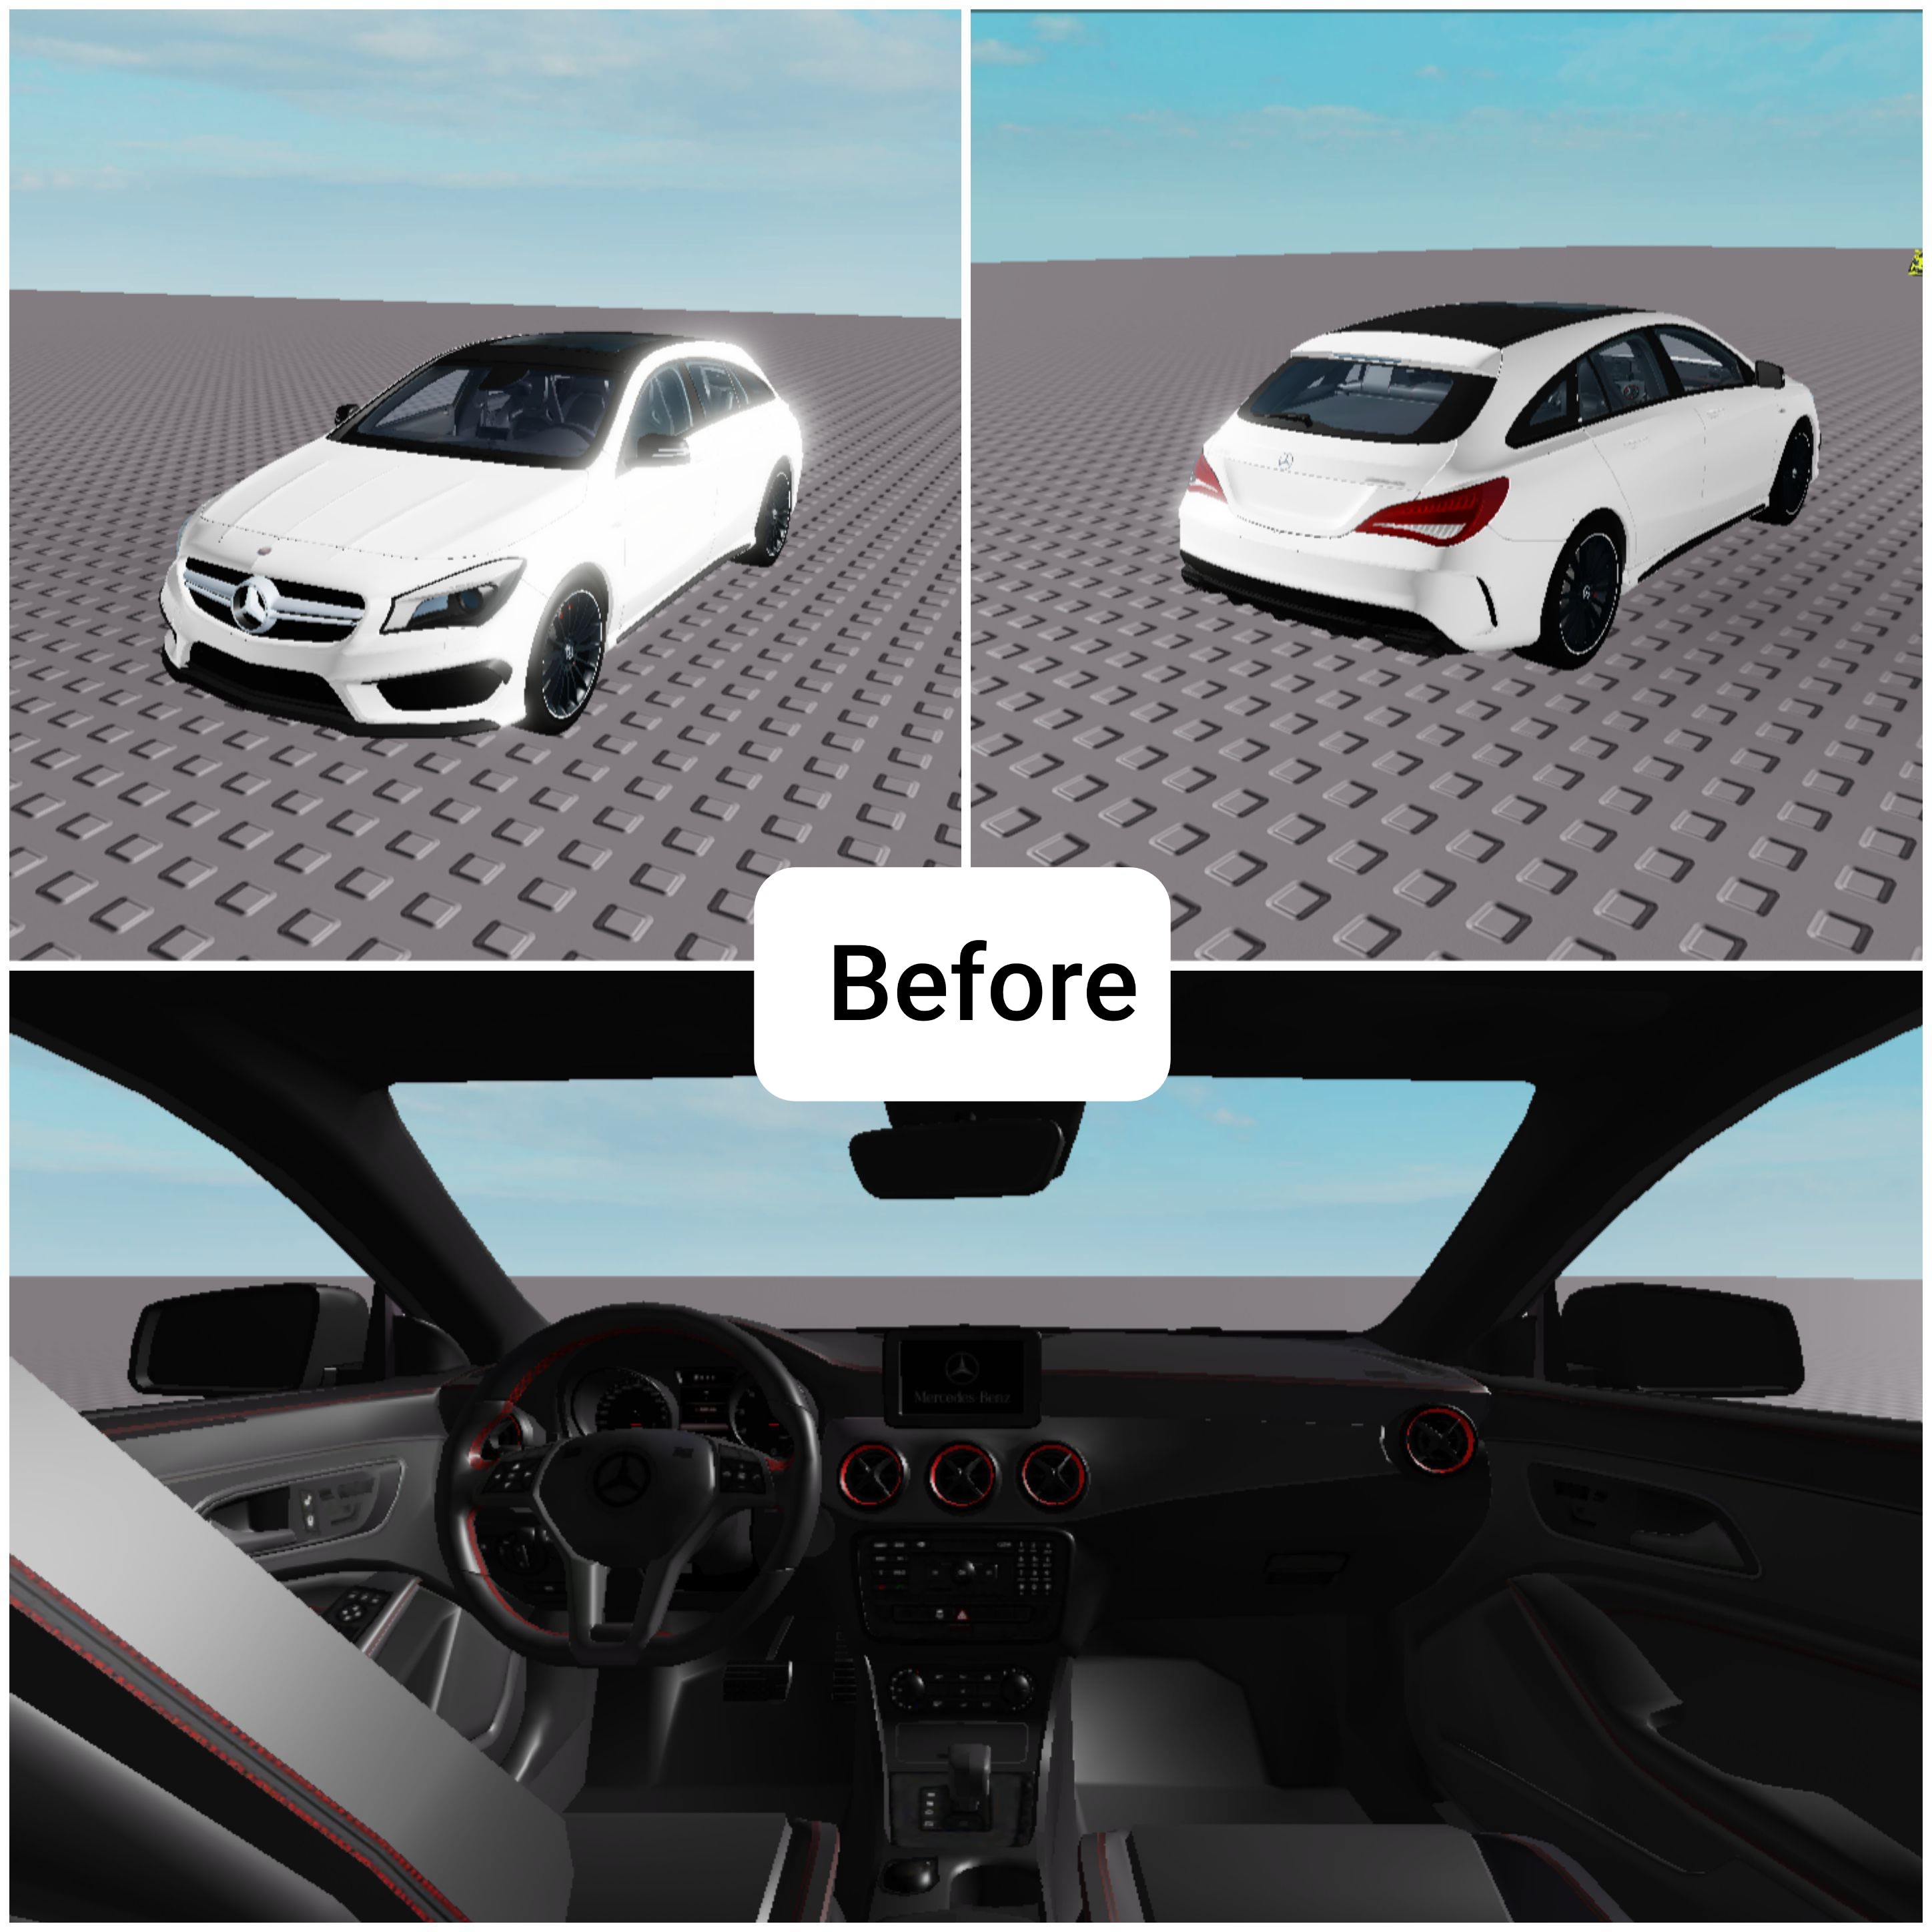 Modify Your Car Model In Roblox Studio With The Specifications You Desire By Sebastian Yeong - roblox studio vehicle